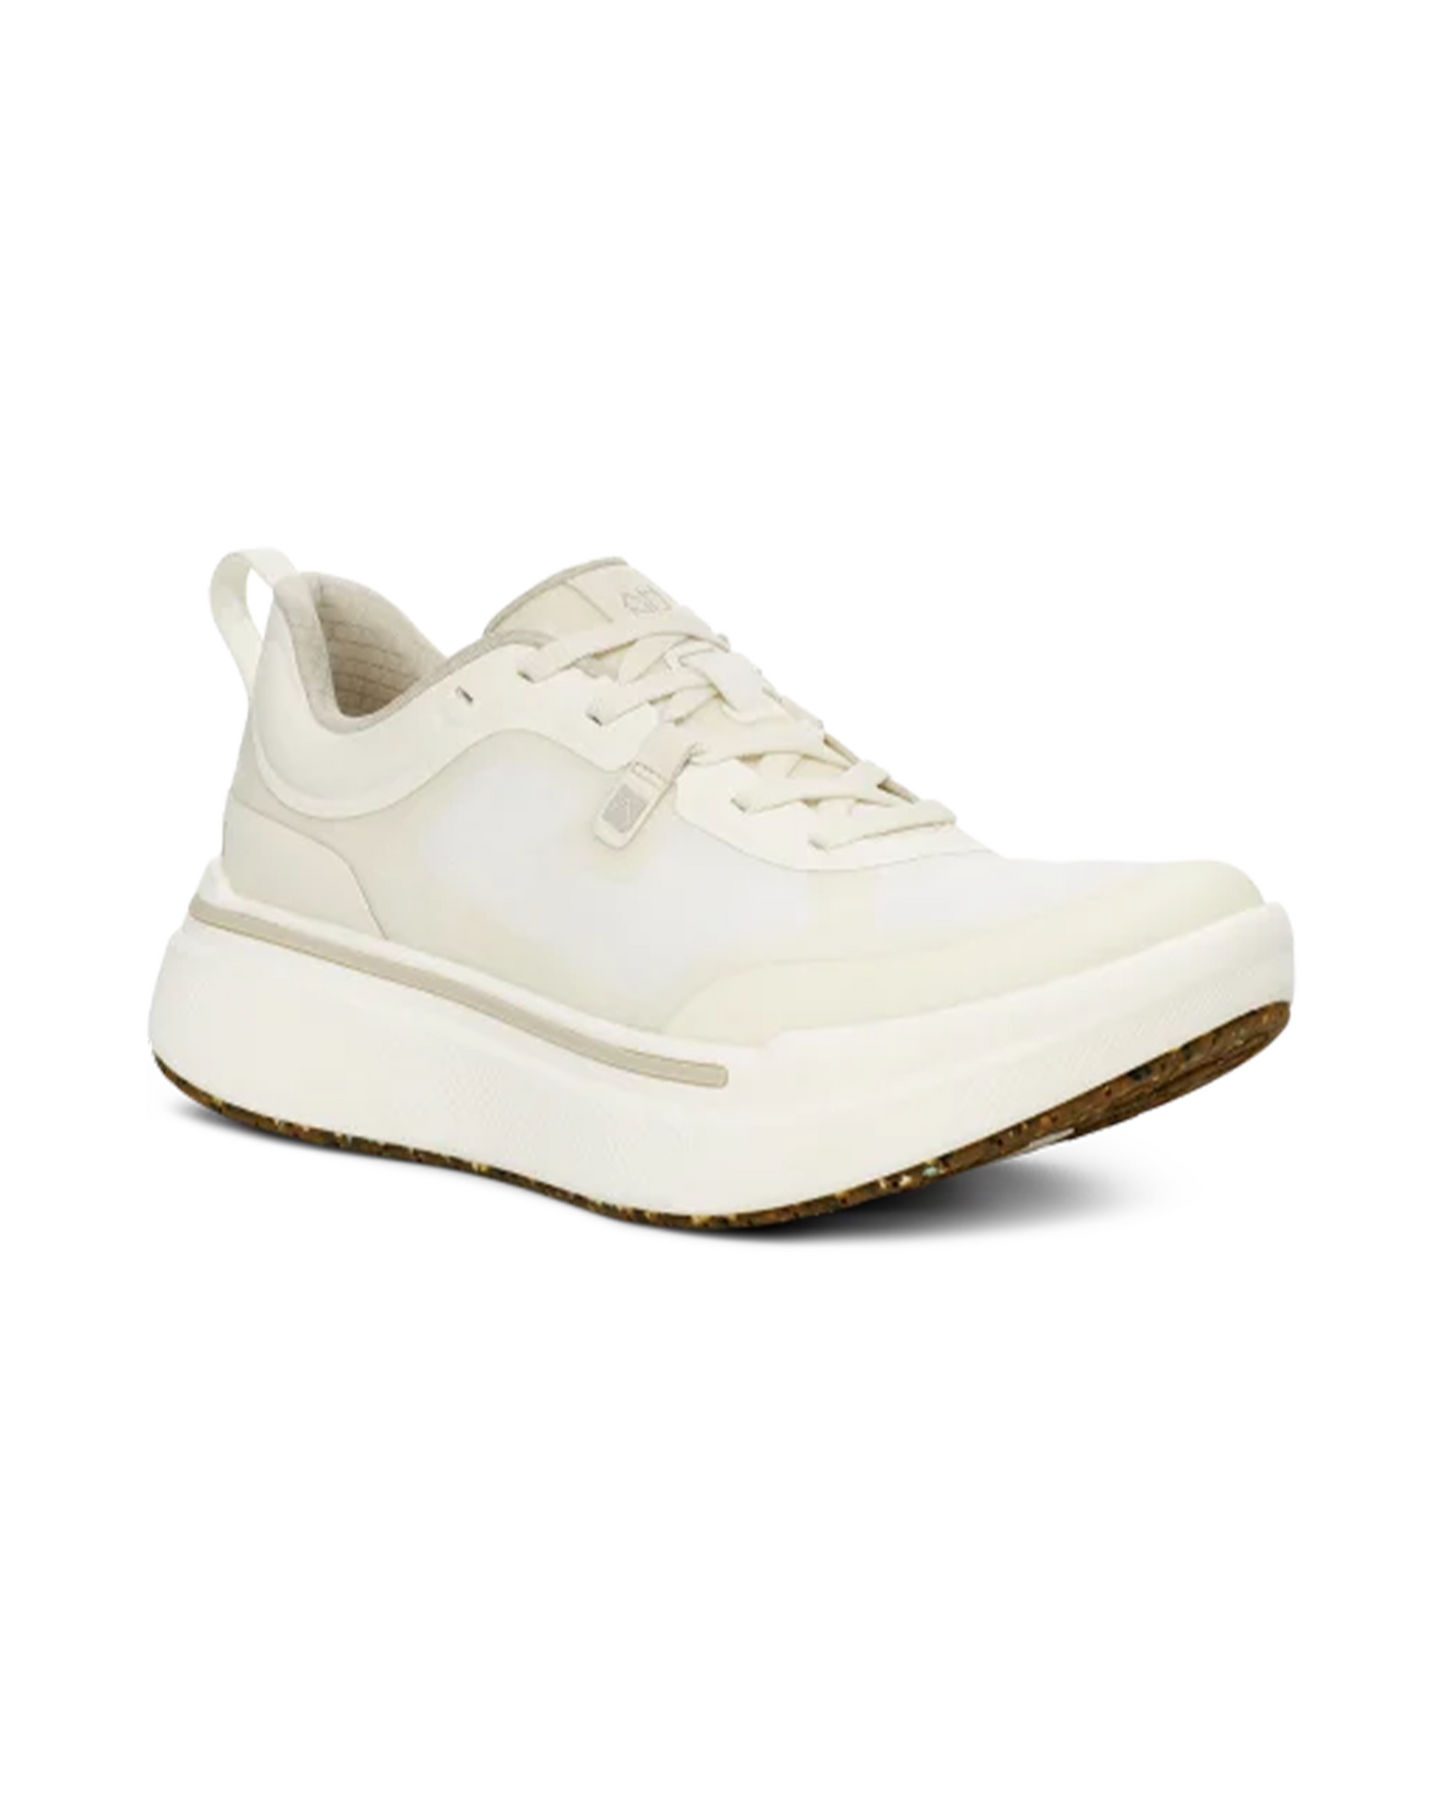 
                    
                      Ahnu Sequence 1 Low White/White
                    
                  